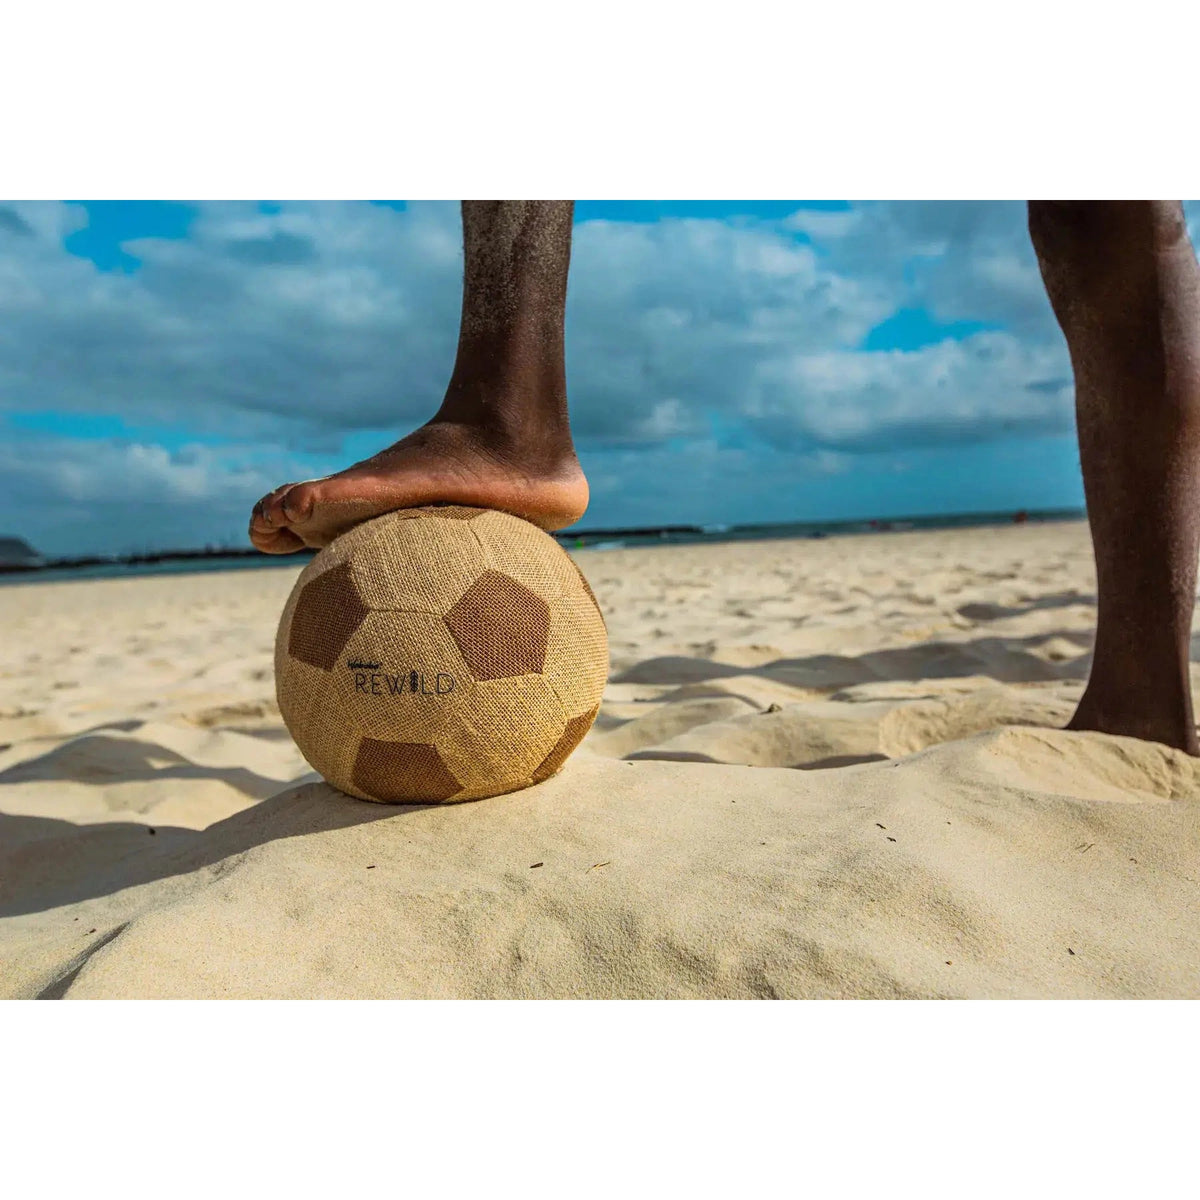 Front view of a beach with just the bottom half a person&#39;s legs with one foot on the Rewild Soccer Ball.